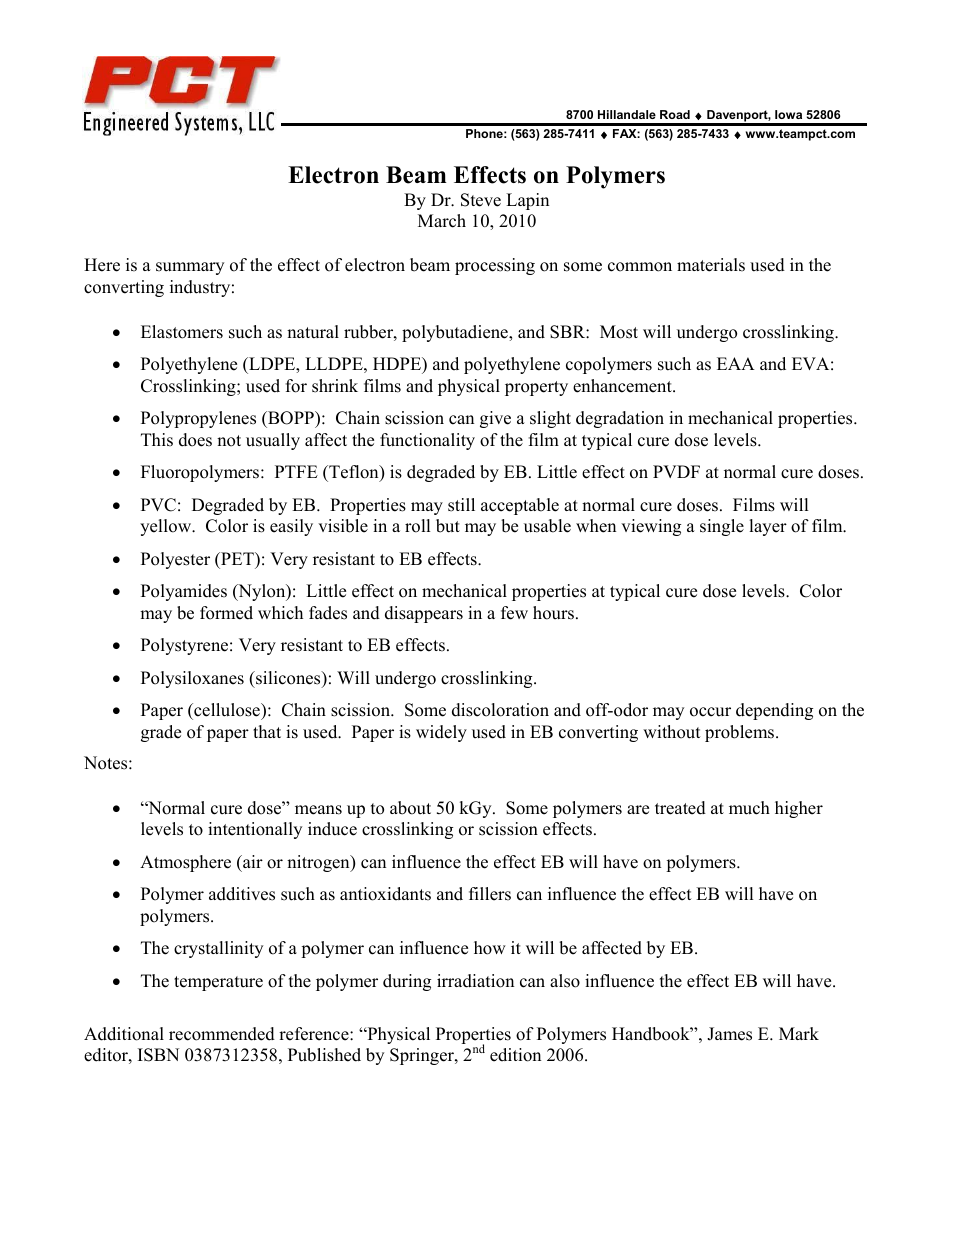 Electron Beam Effects on Polymers